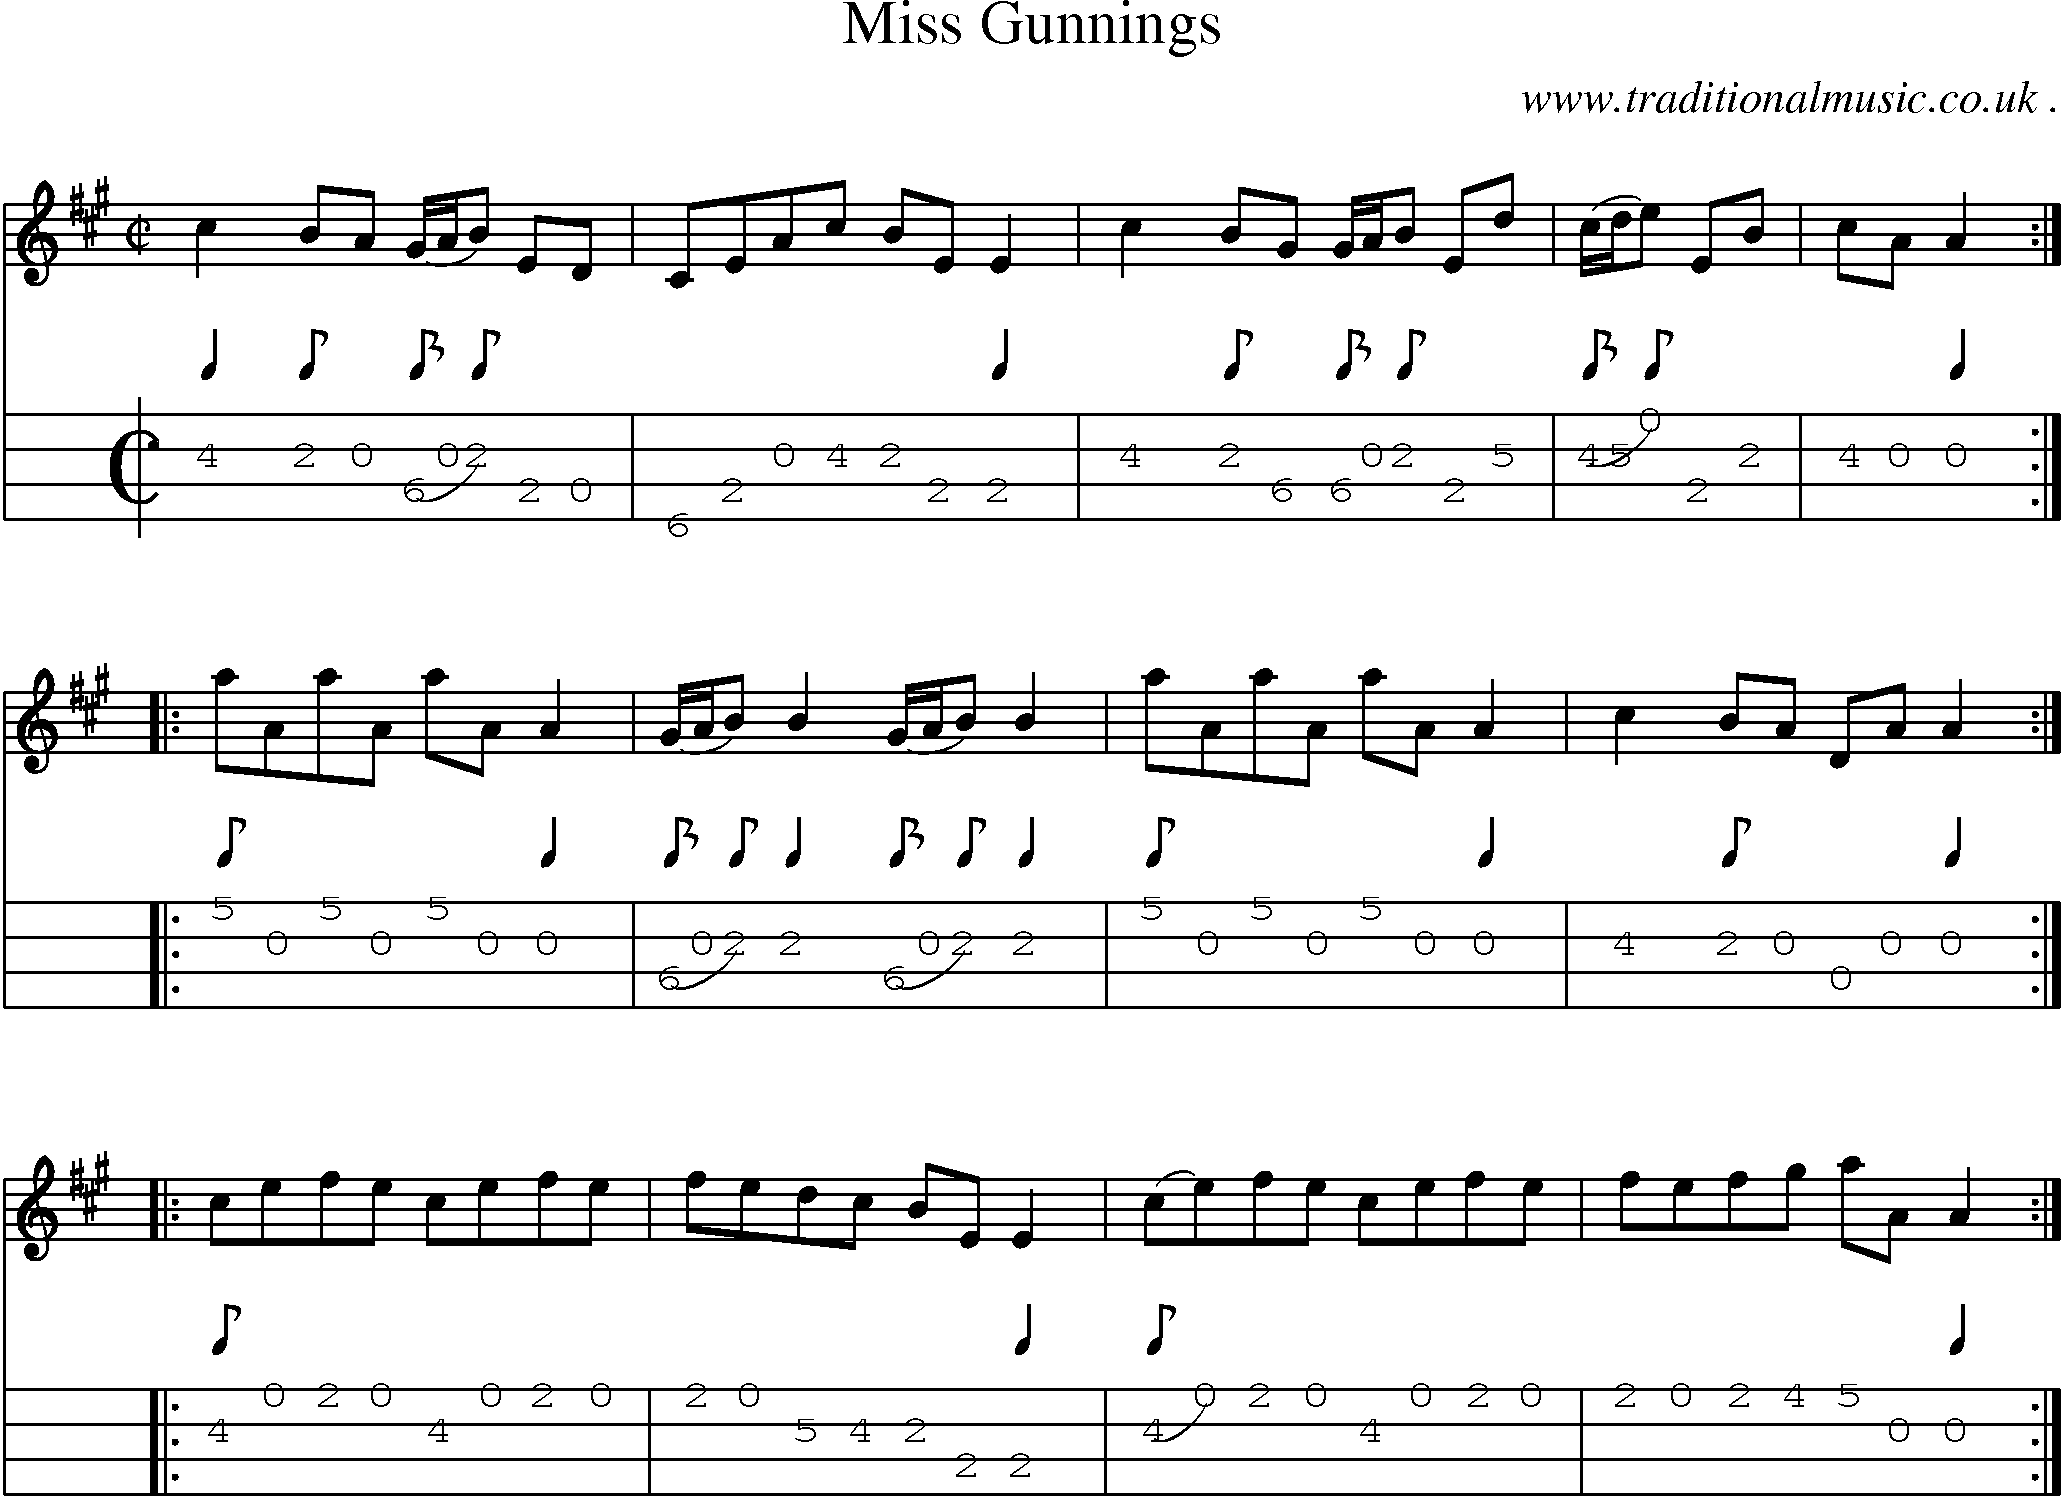 Sheet-music  score, Chords and Mandolin Tabs for Miss Gunnings